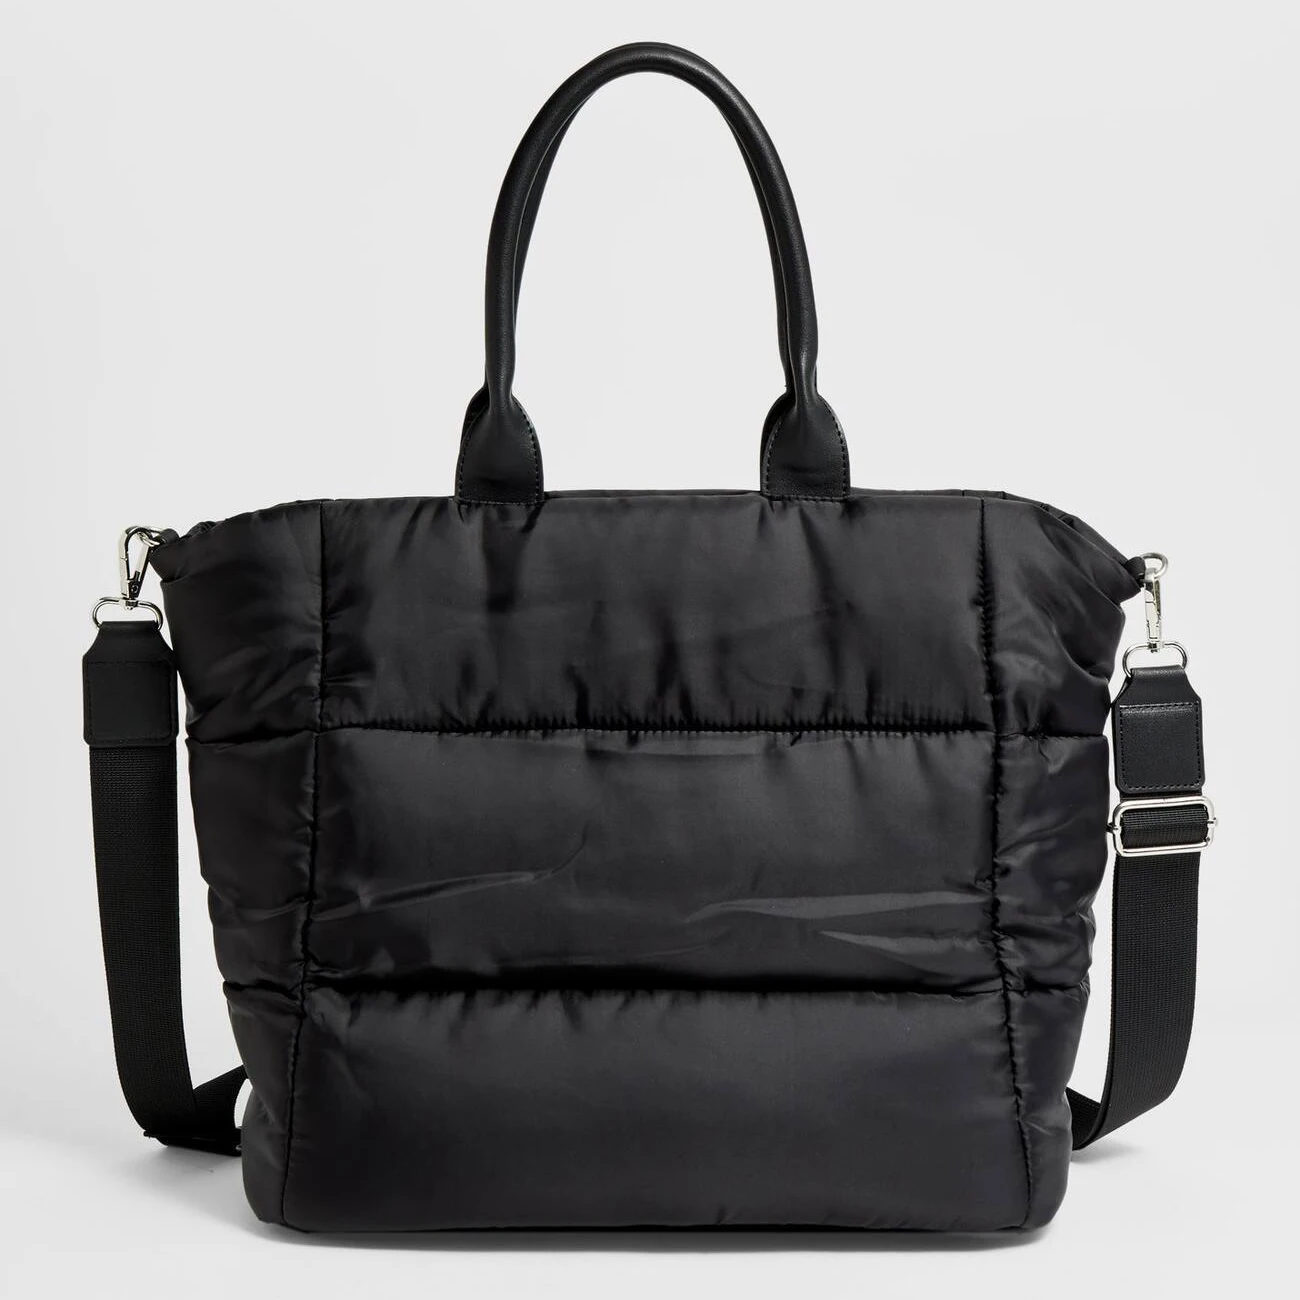 New Trendy Nylon Padded Puffing Bag Black Puffed Quilted Tote Bag